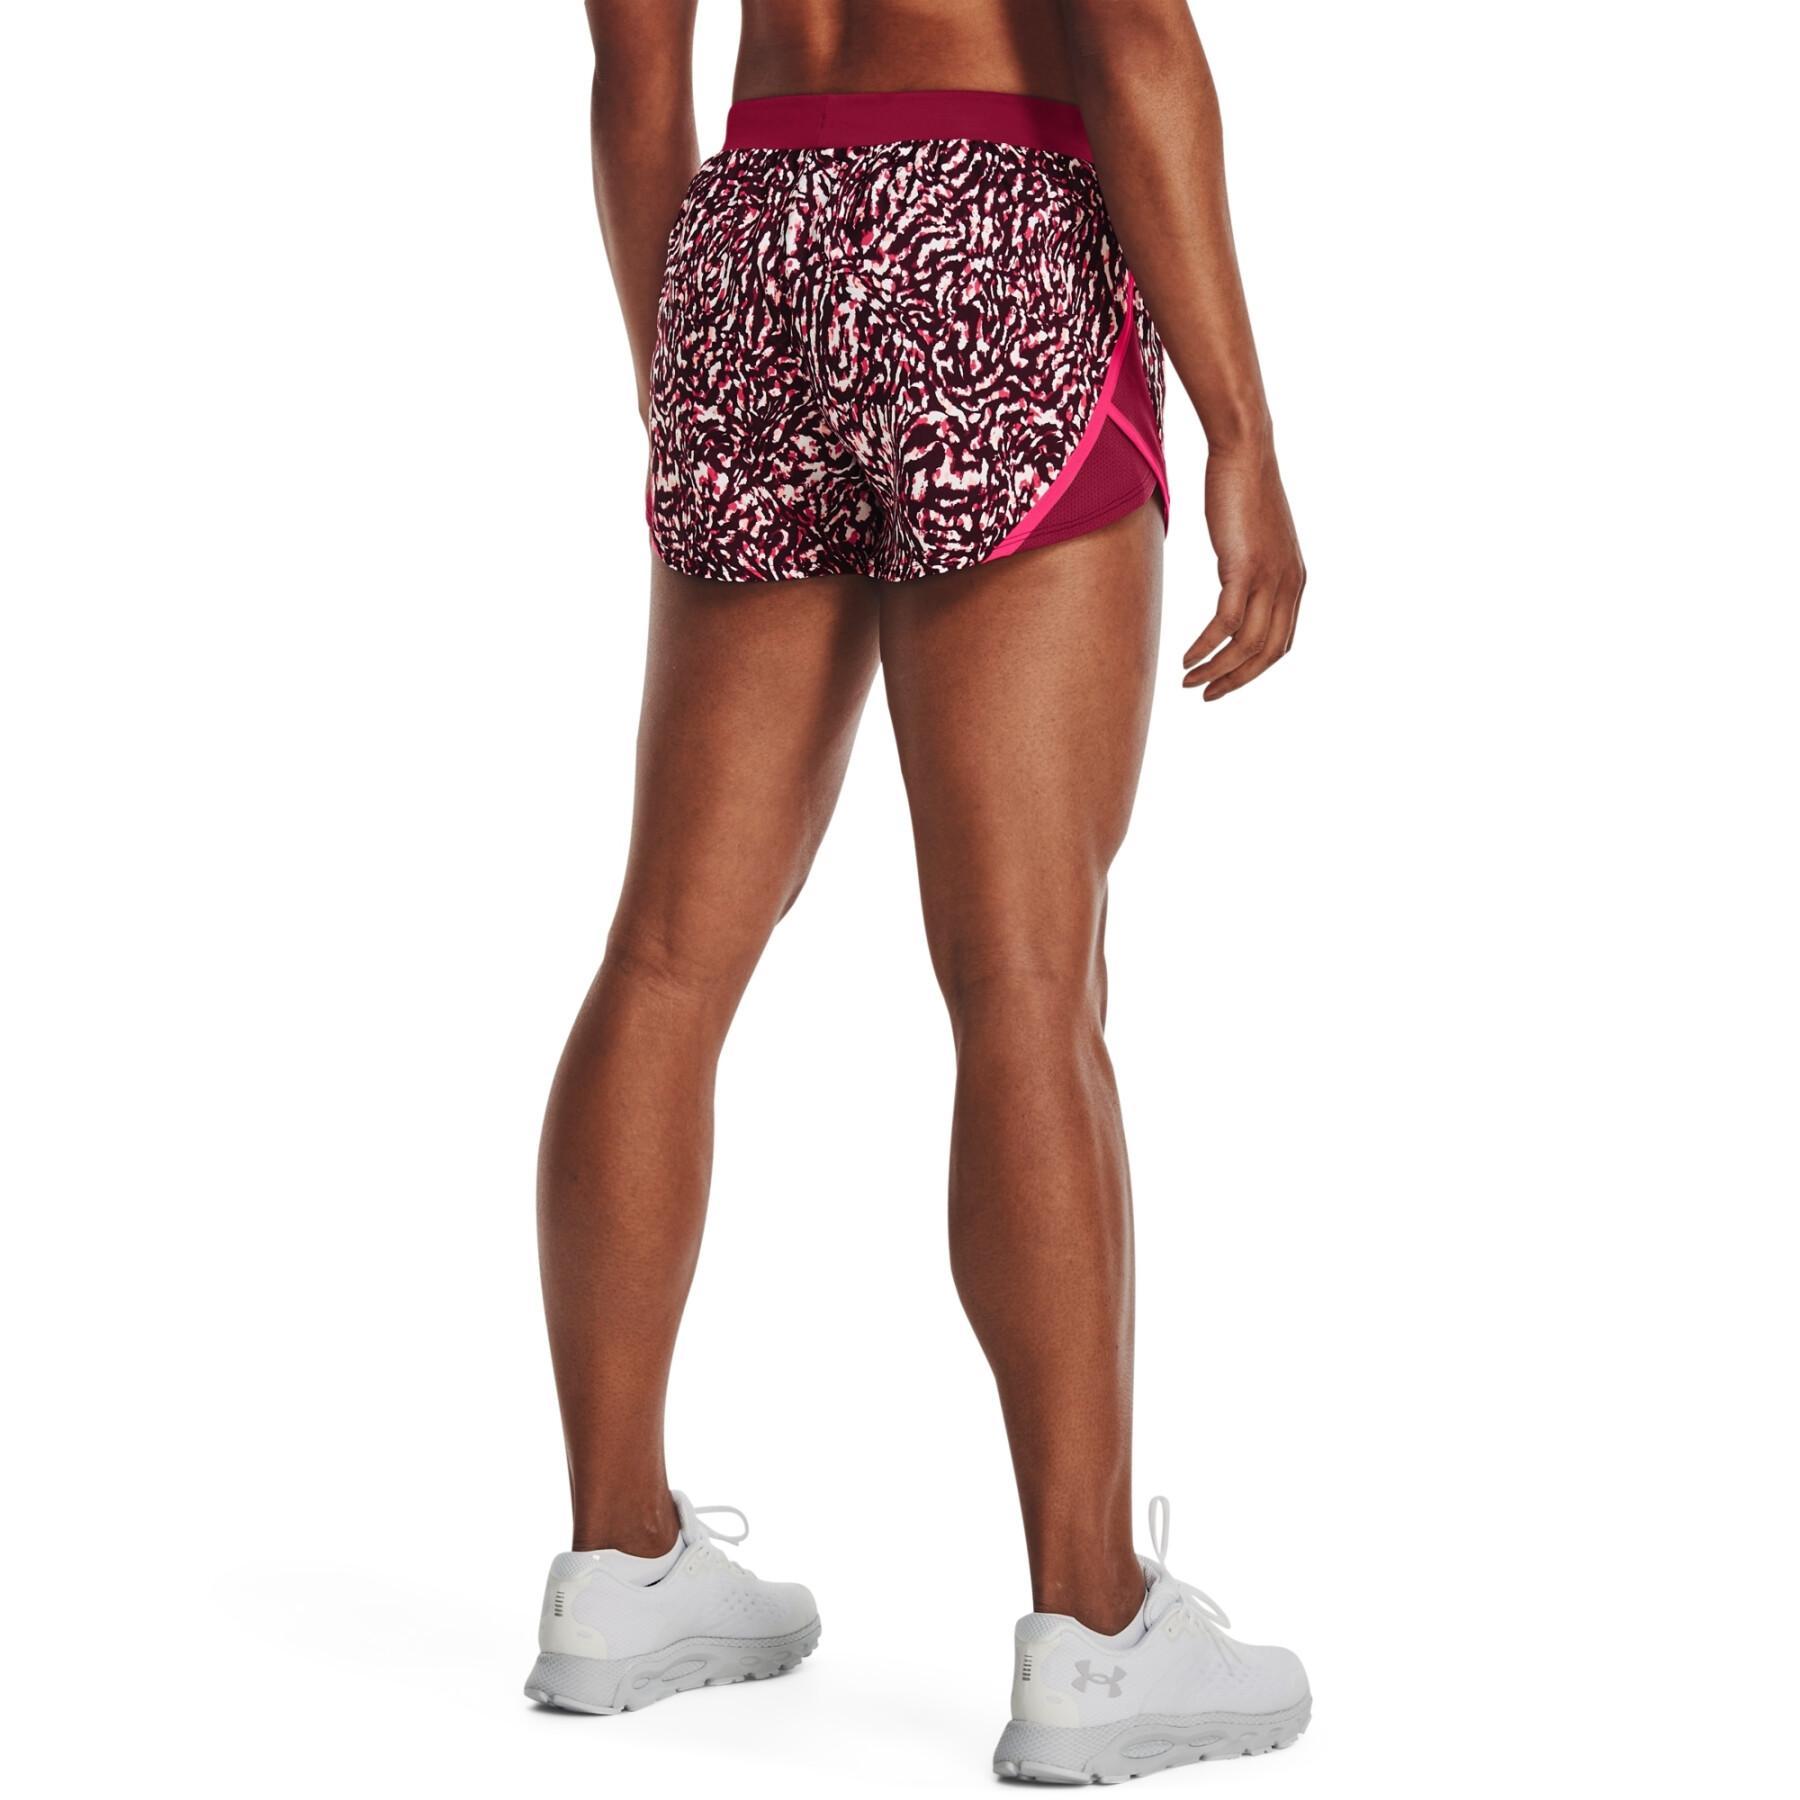 Women's printed shorts Under Armour Fly-by 2.0